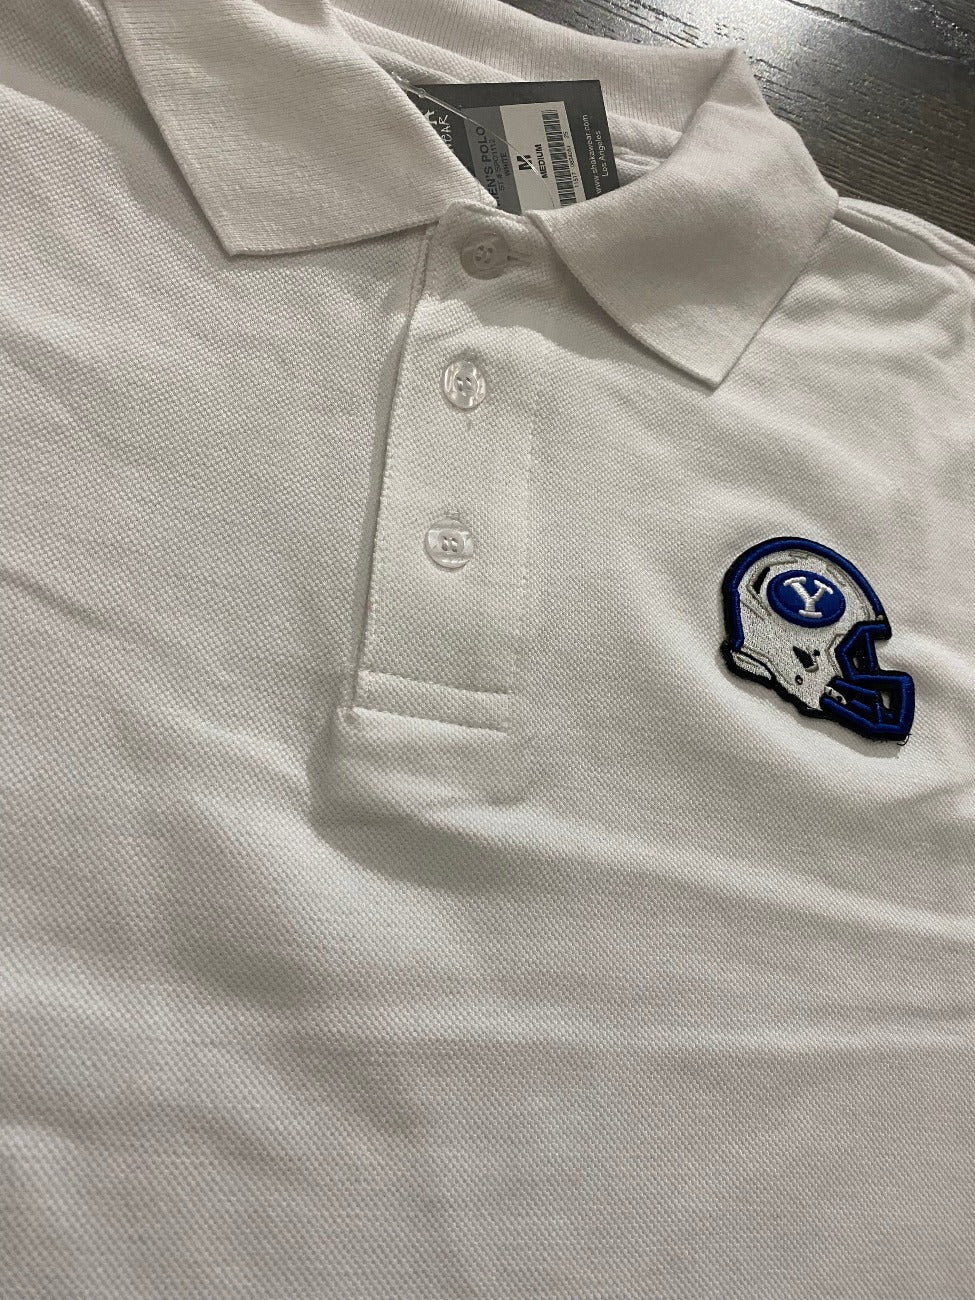 White Polo with Custom BYU Helmet Puff Patch